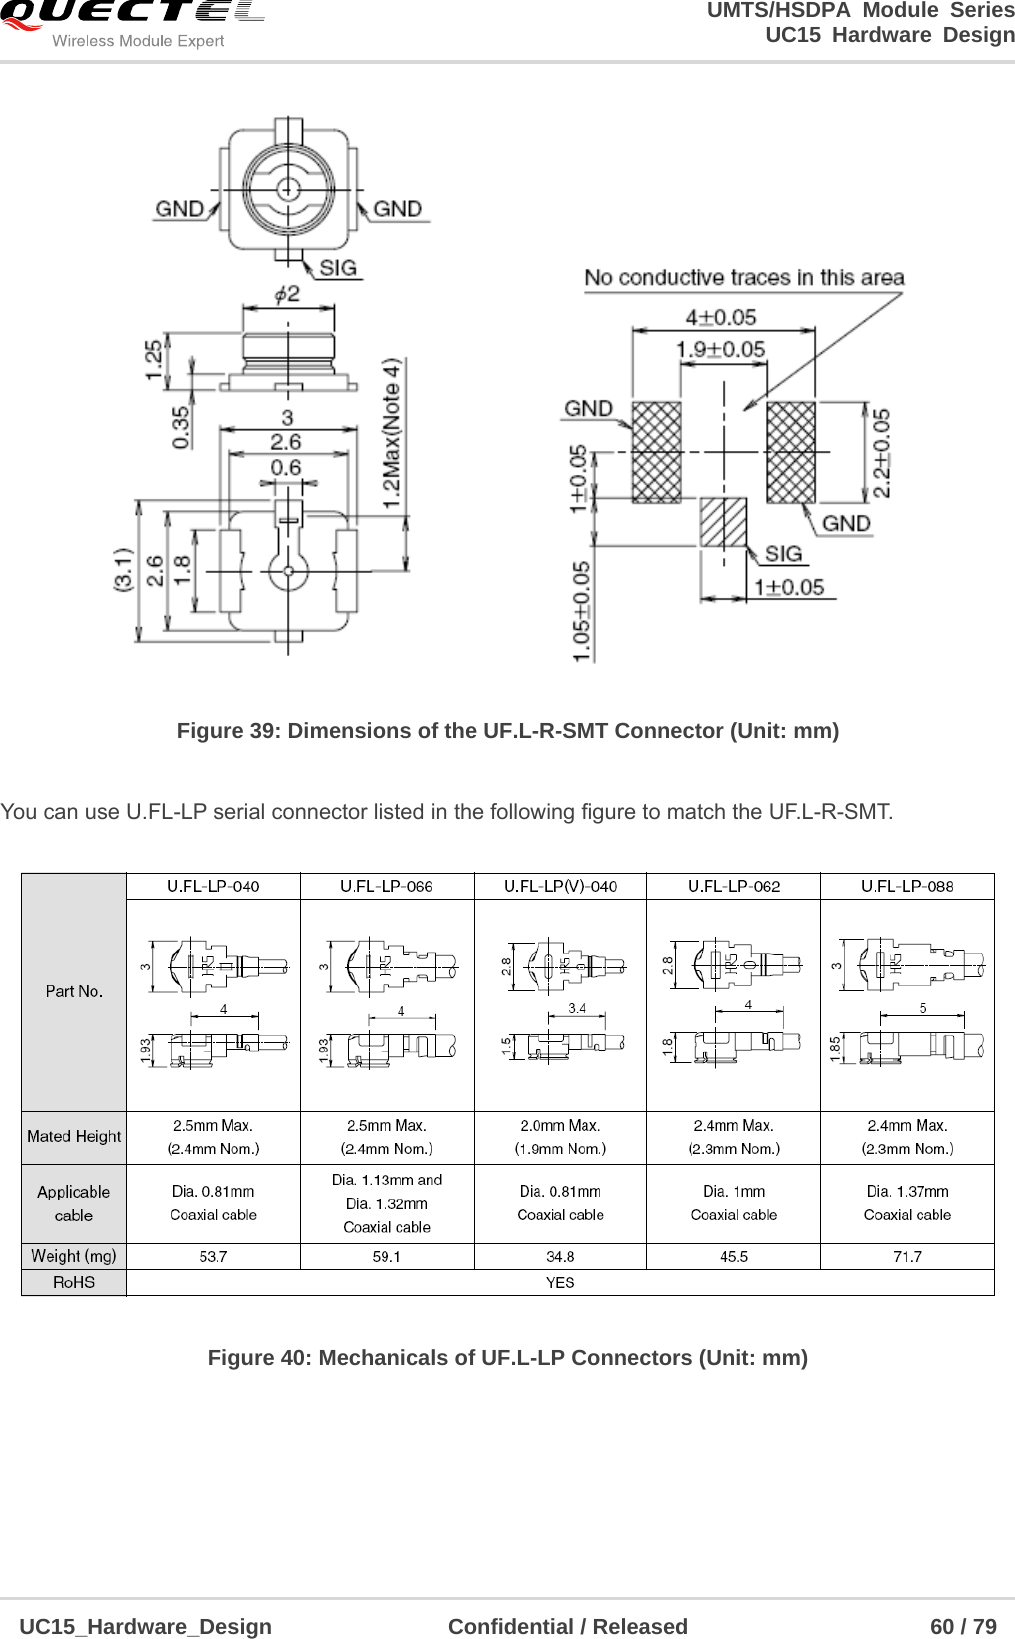                                                                        UMTS/HSDPA Module Series                                                                 UC15 Hardware Design  UC15_Hardware_Design                Confidential / Released                      60 / 79     Figure 39: Dimensions of the UF.L-R-SMT Connector (Unit: mm)  You can use U.FL-LP serial connector listed in the following figure to match the UF.L-R-SMT.  Figure 40: Mechanicals of UF.L-LP Connectors (Unit: mm)      